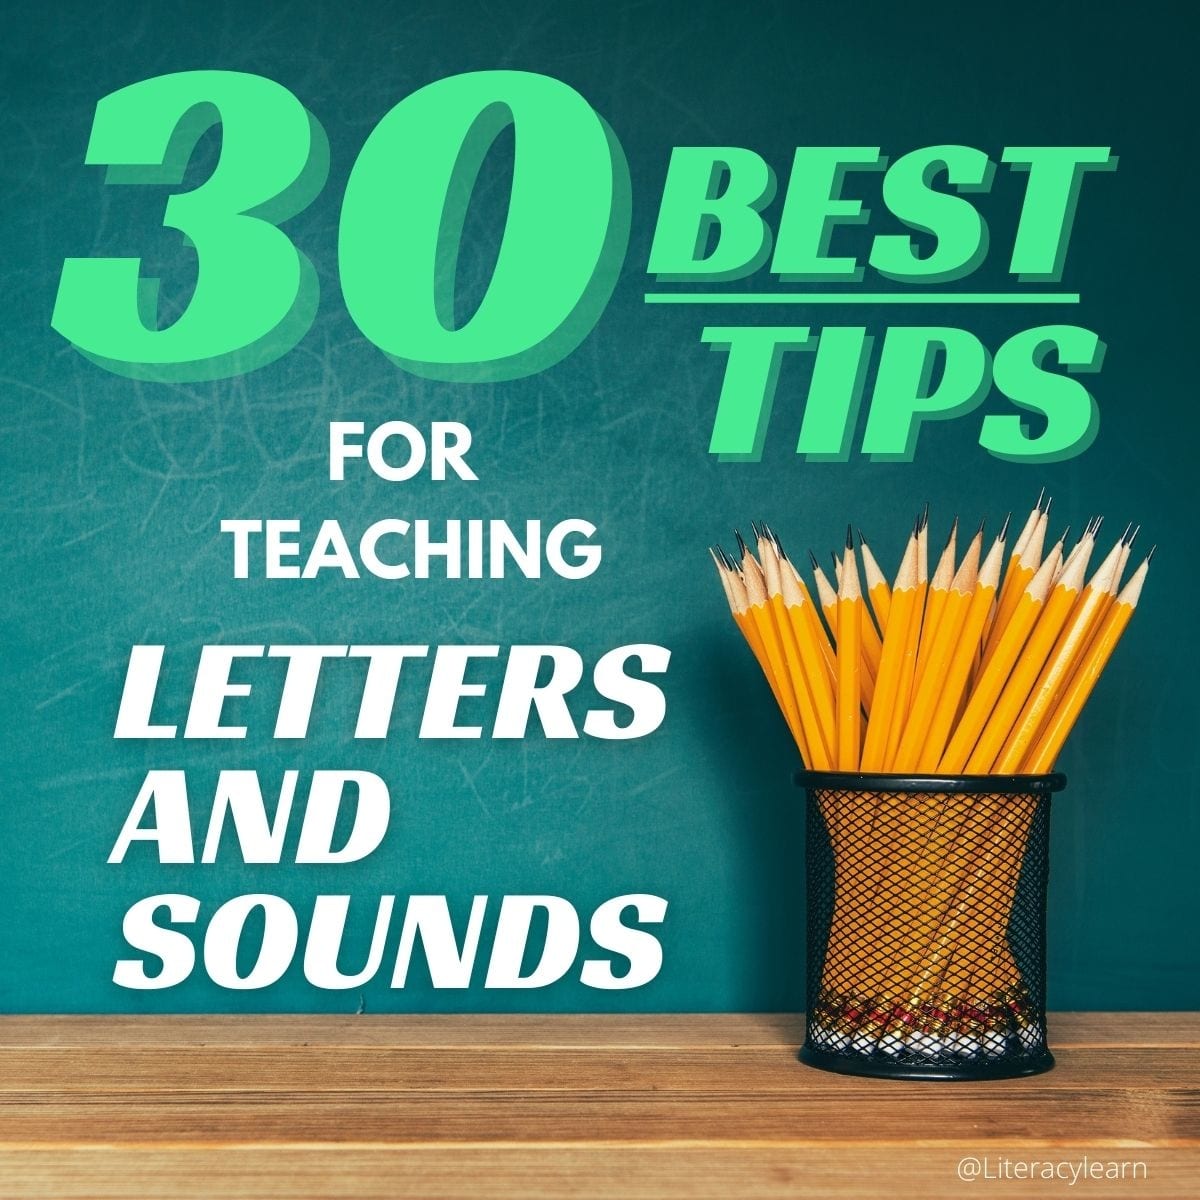 30-best-tips-for-teaching-letters-and-sounds-freebies-literacy-learn